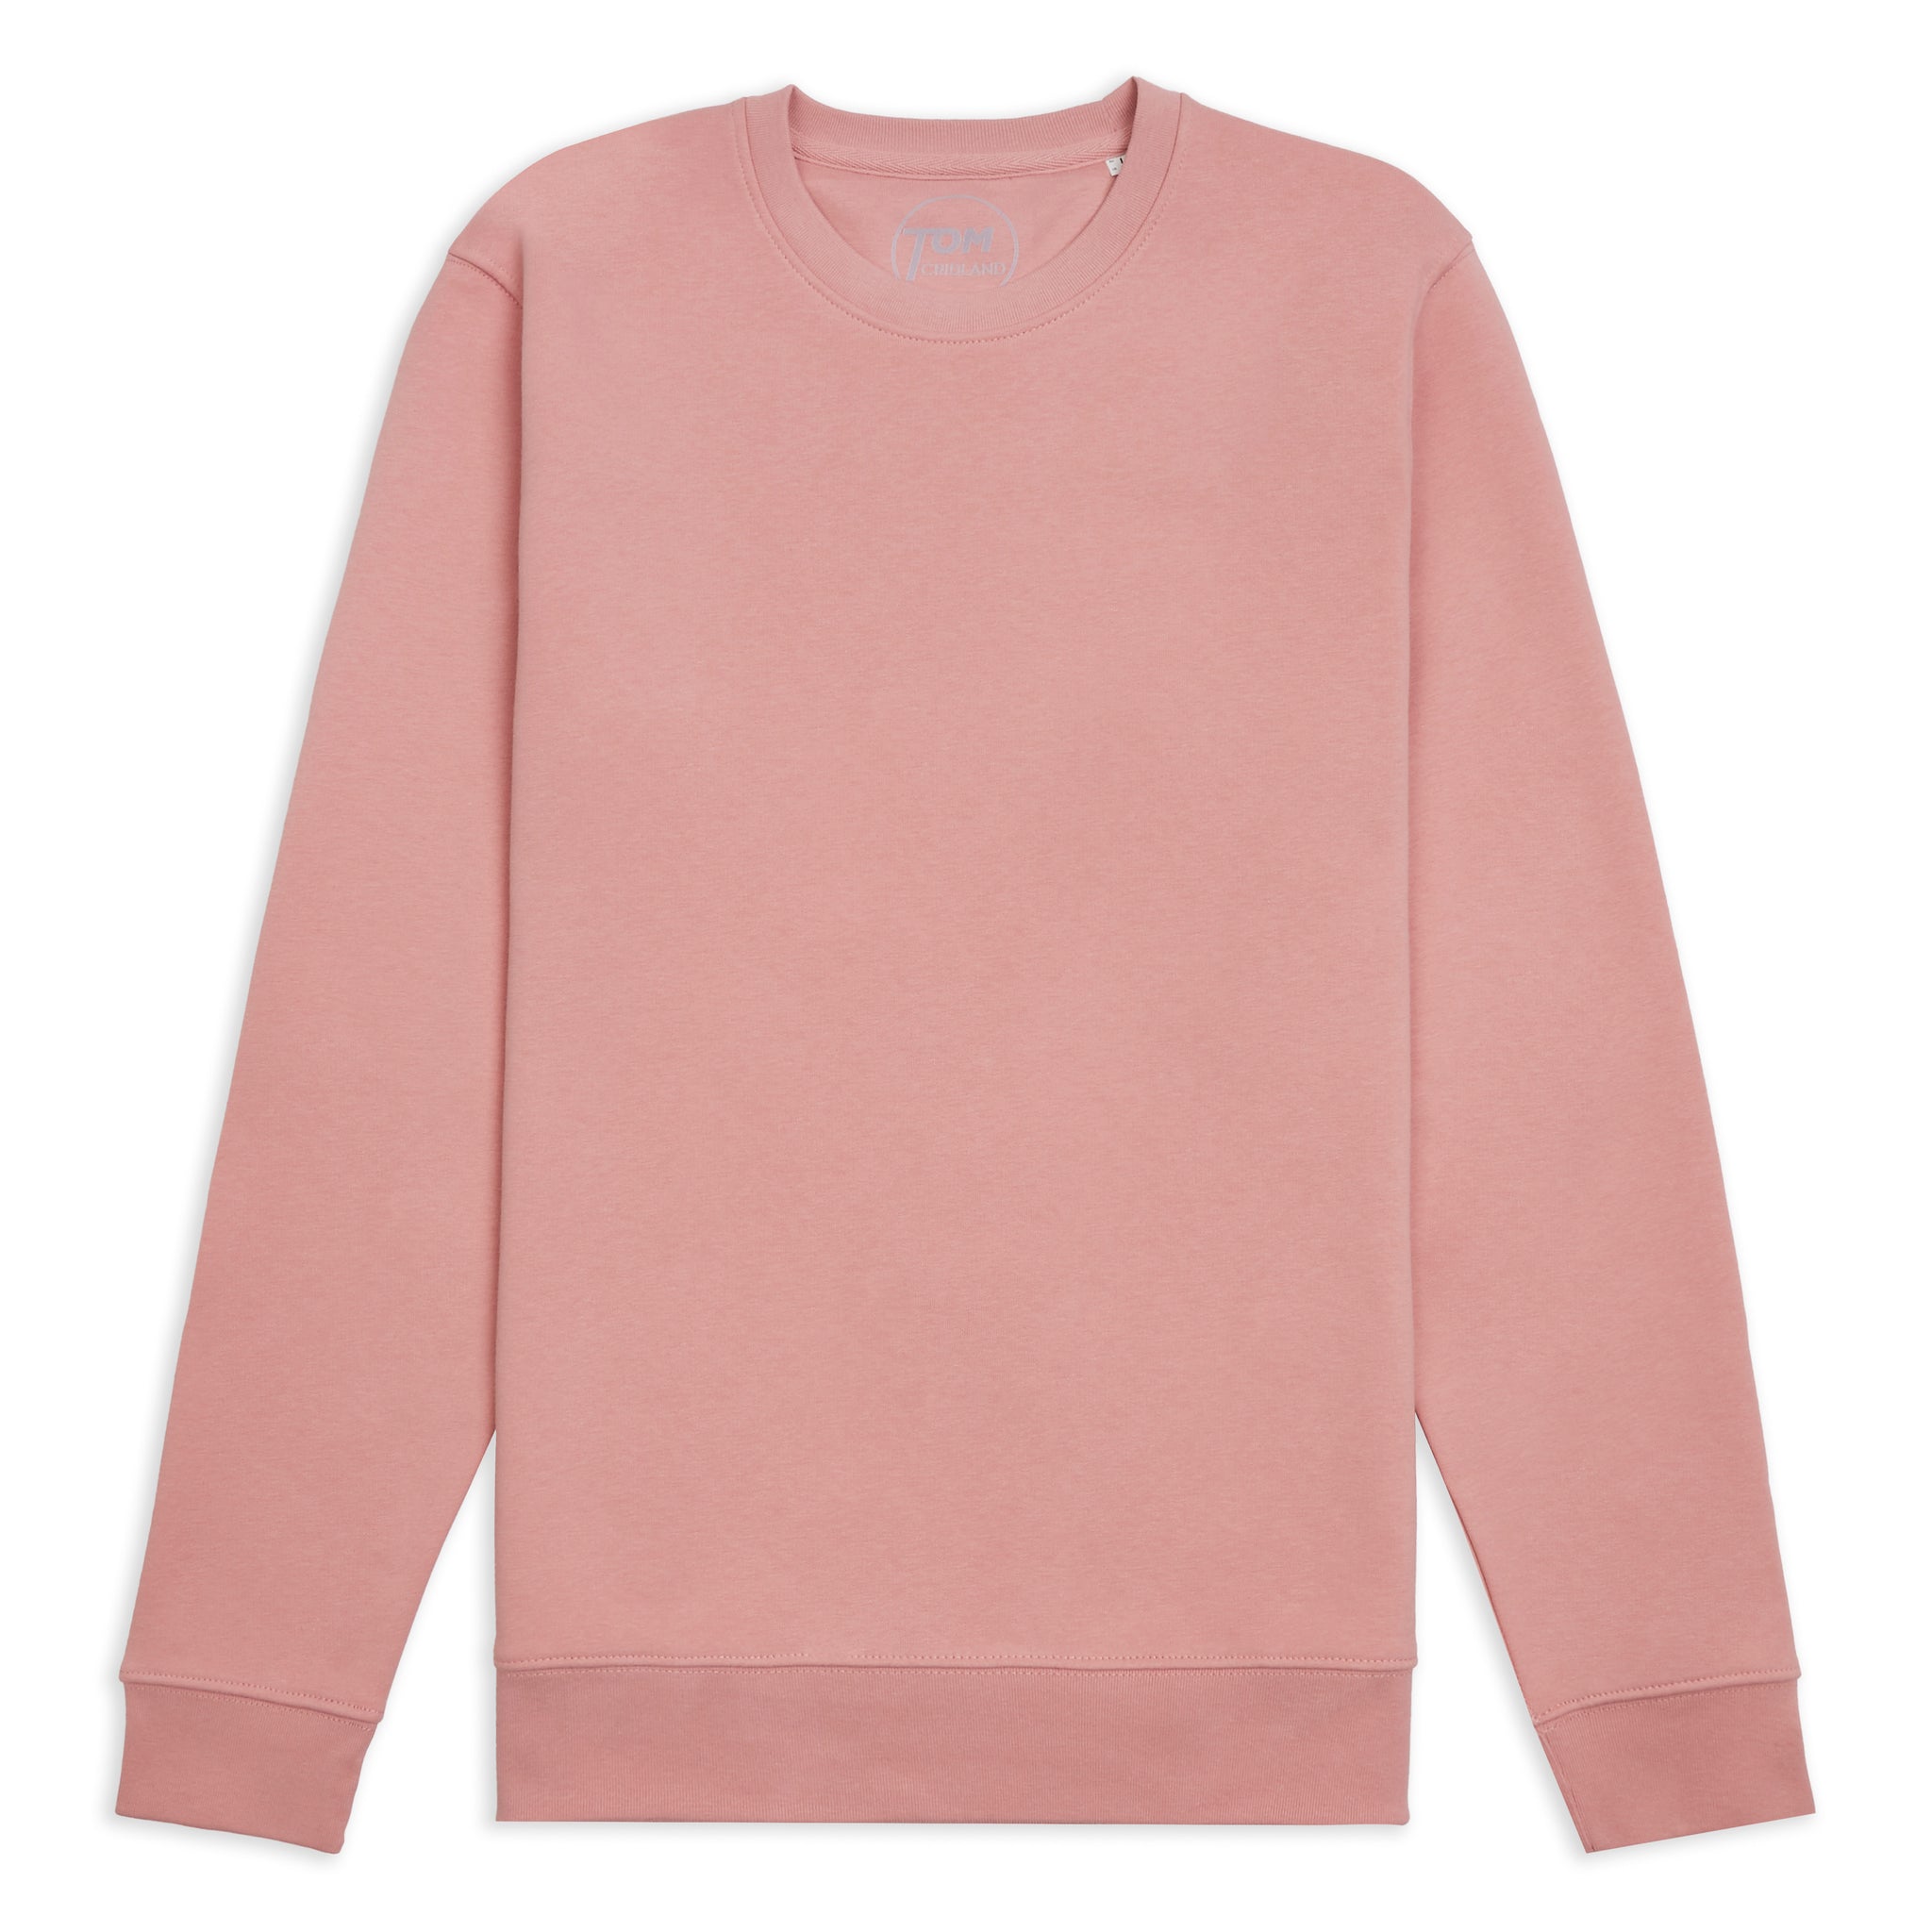 Pink Panther 30 Year Sweatshirt | Sustainable fashion by Tom Cridland